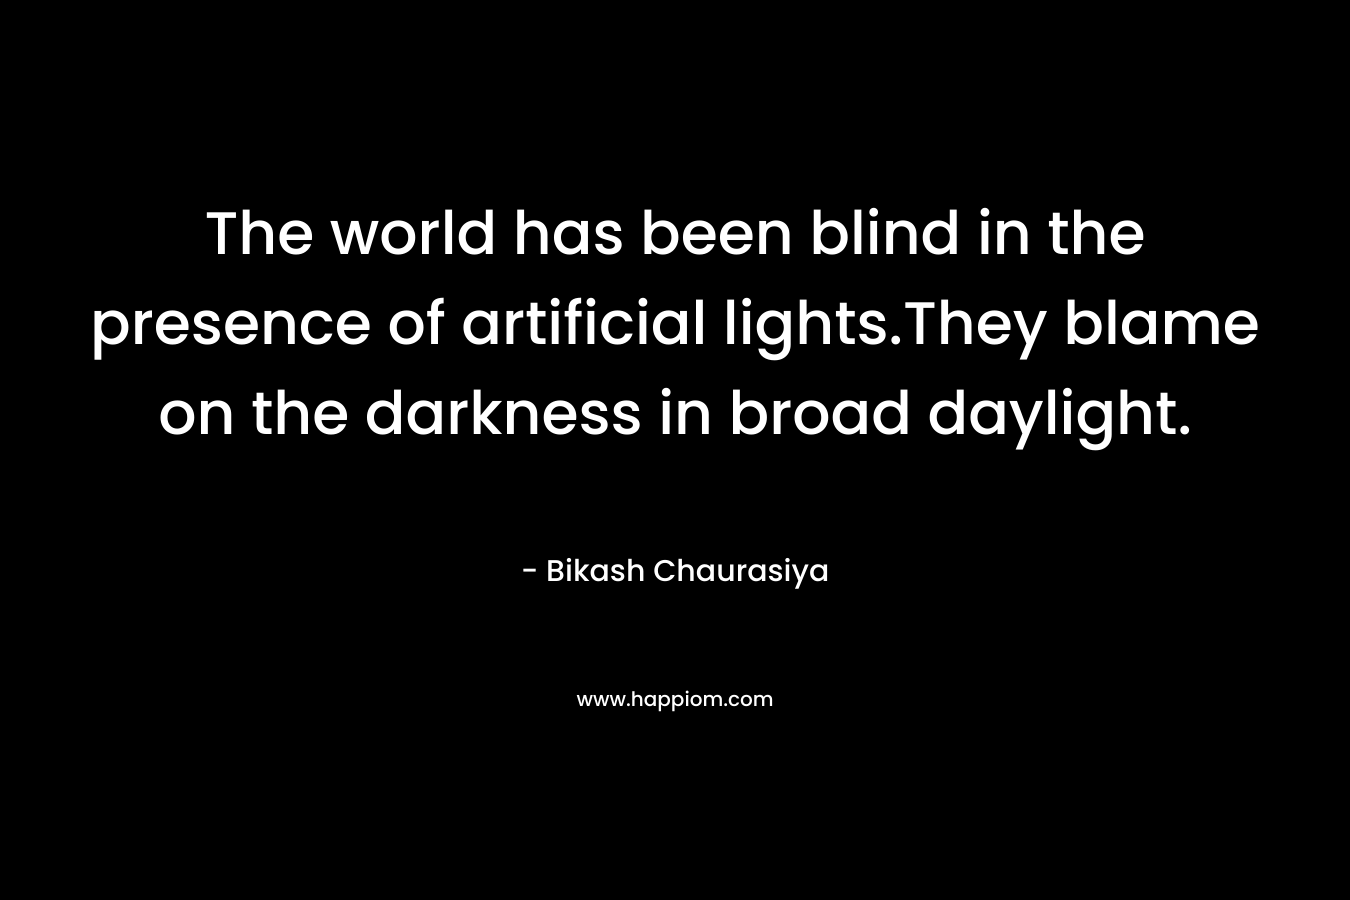 The world has been blind in the presence of artificial lights.They blame on the darkness in broad daylight.